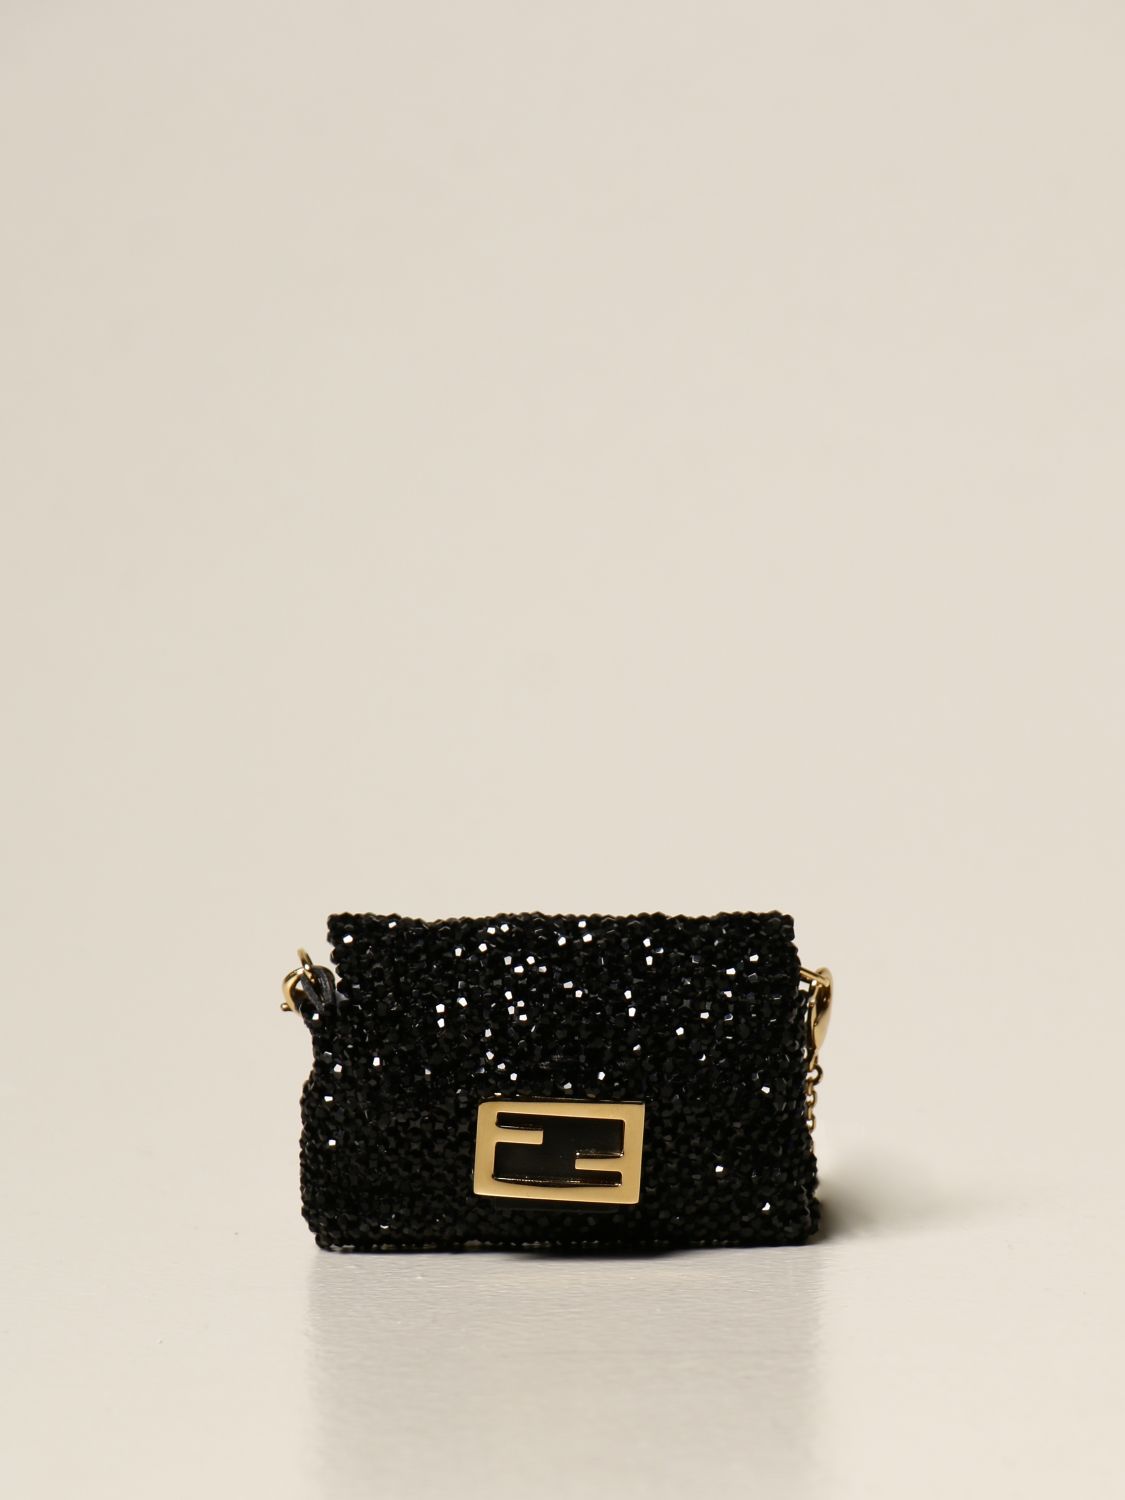 FENDI: Pic Baguette bag with micro crystals and FF logo - Black | Fendi ...